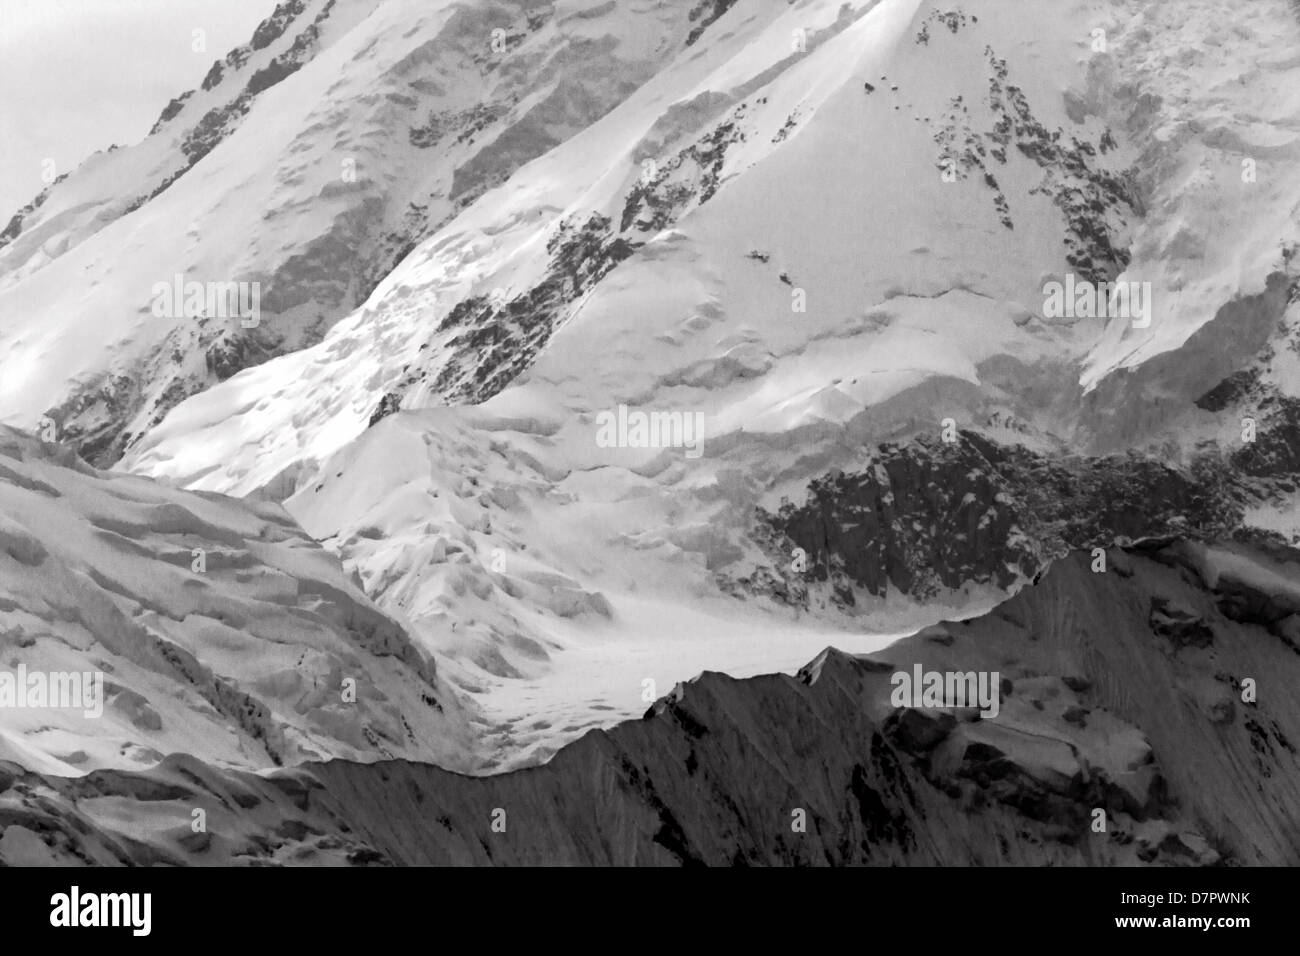 Black and white view of Mt. McKinley (Denali Mountain), highest point N America 20,320' peaking above clouds, Denali Nat'l Park Stock Photo